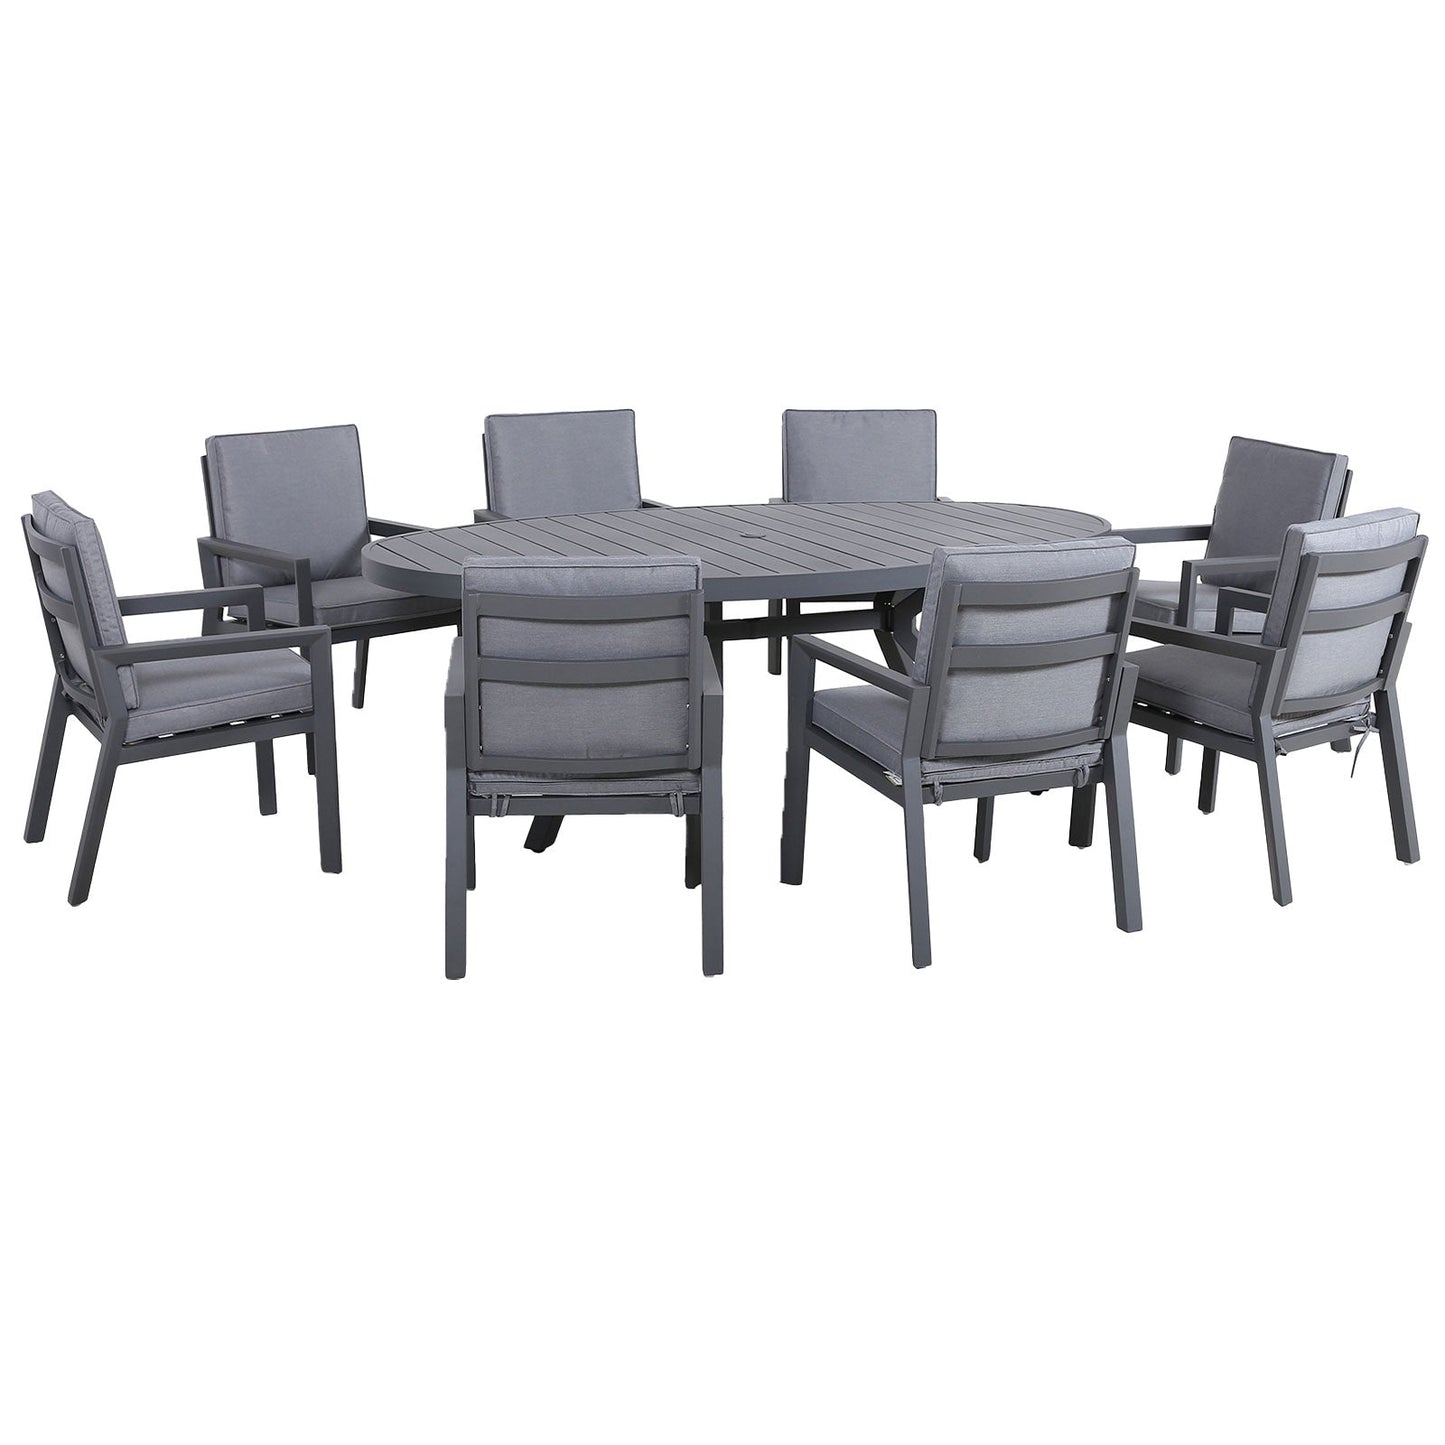 New York Outdoor 8 Seat Oval Dining Set